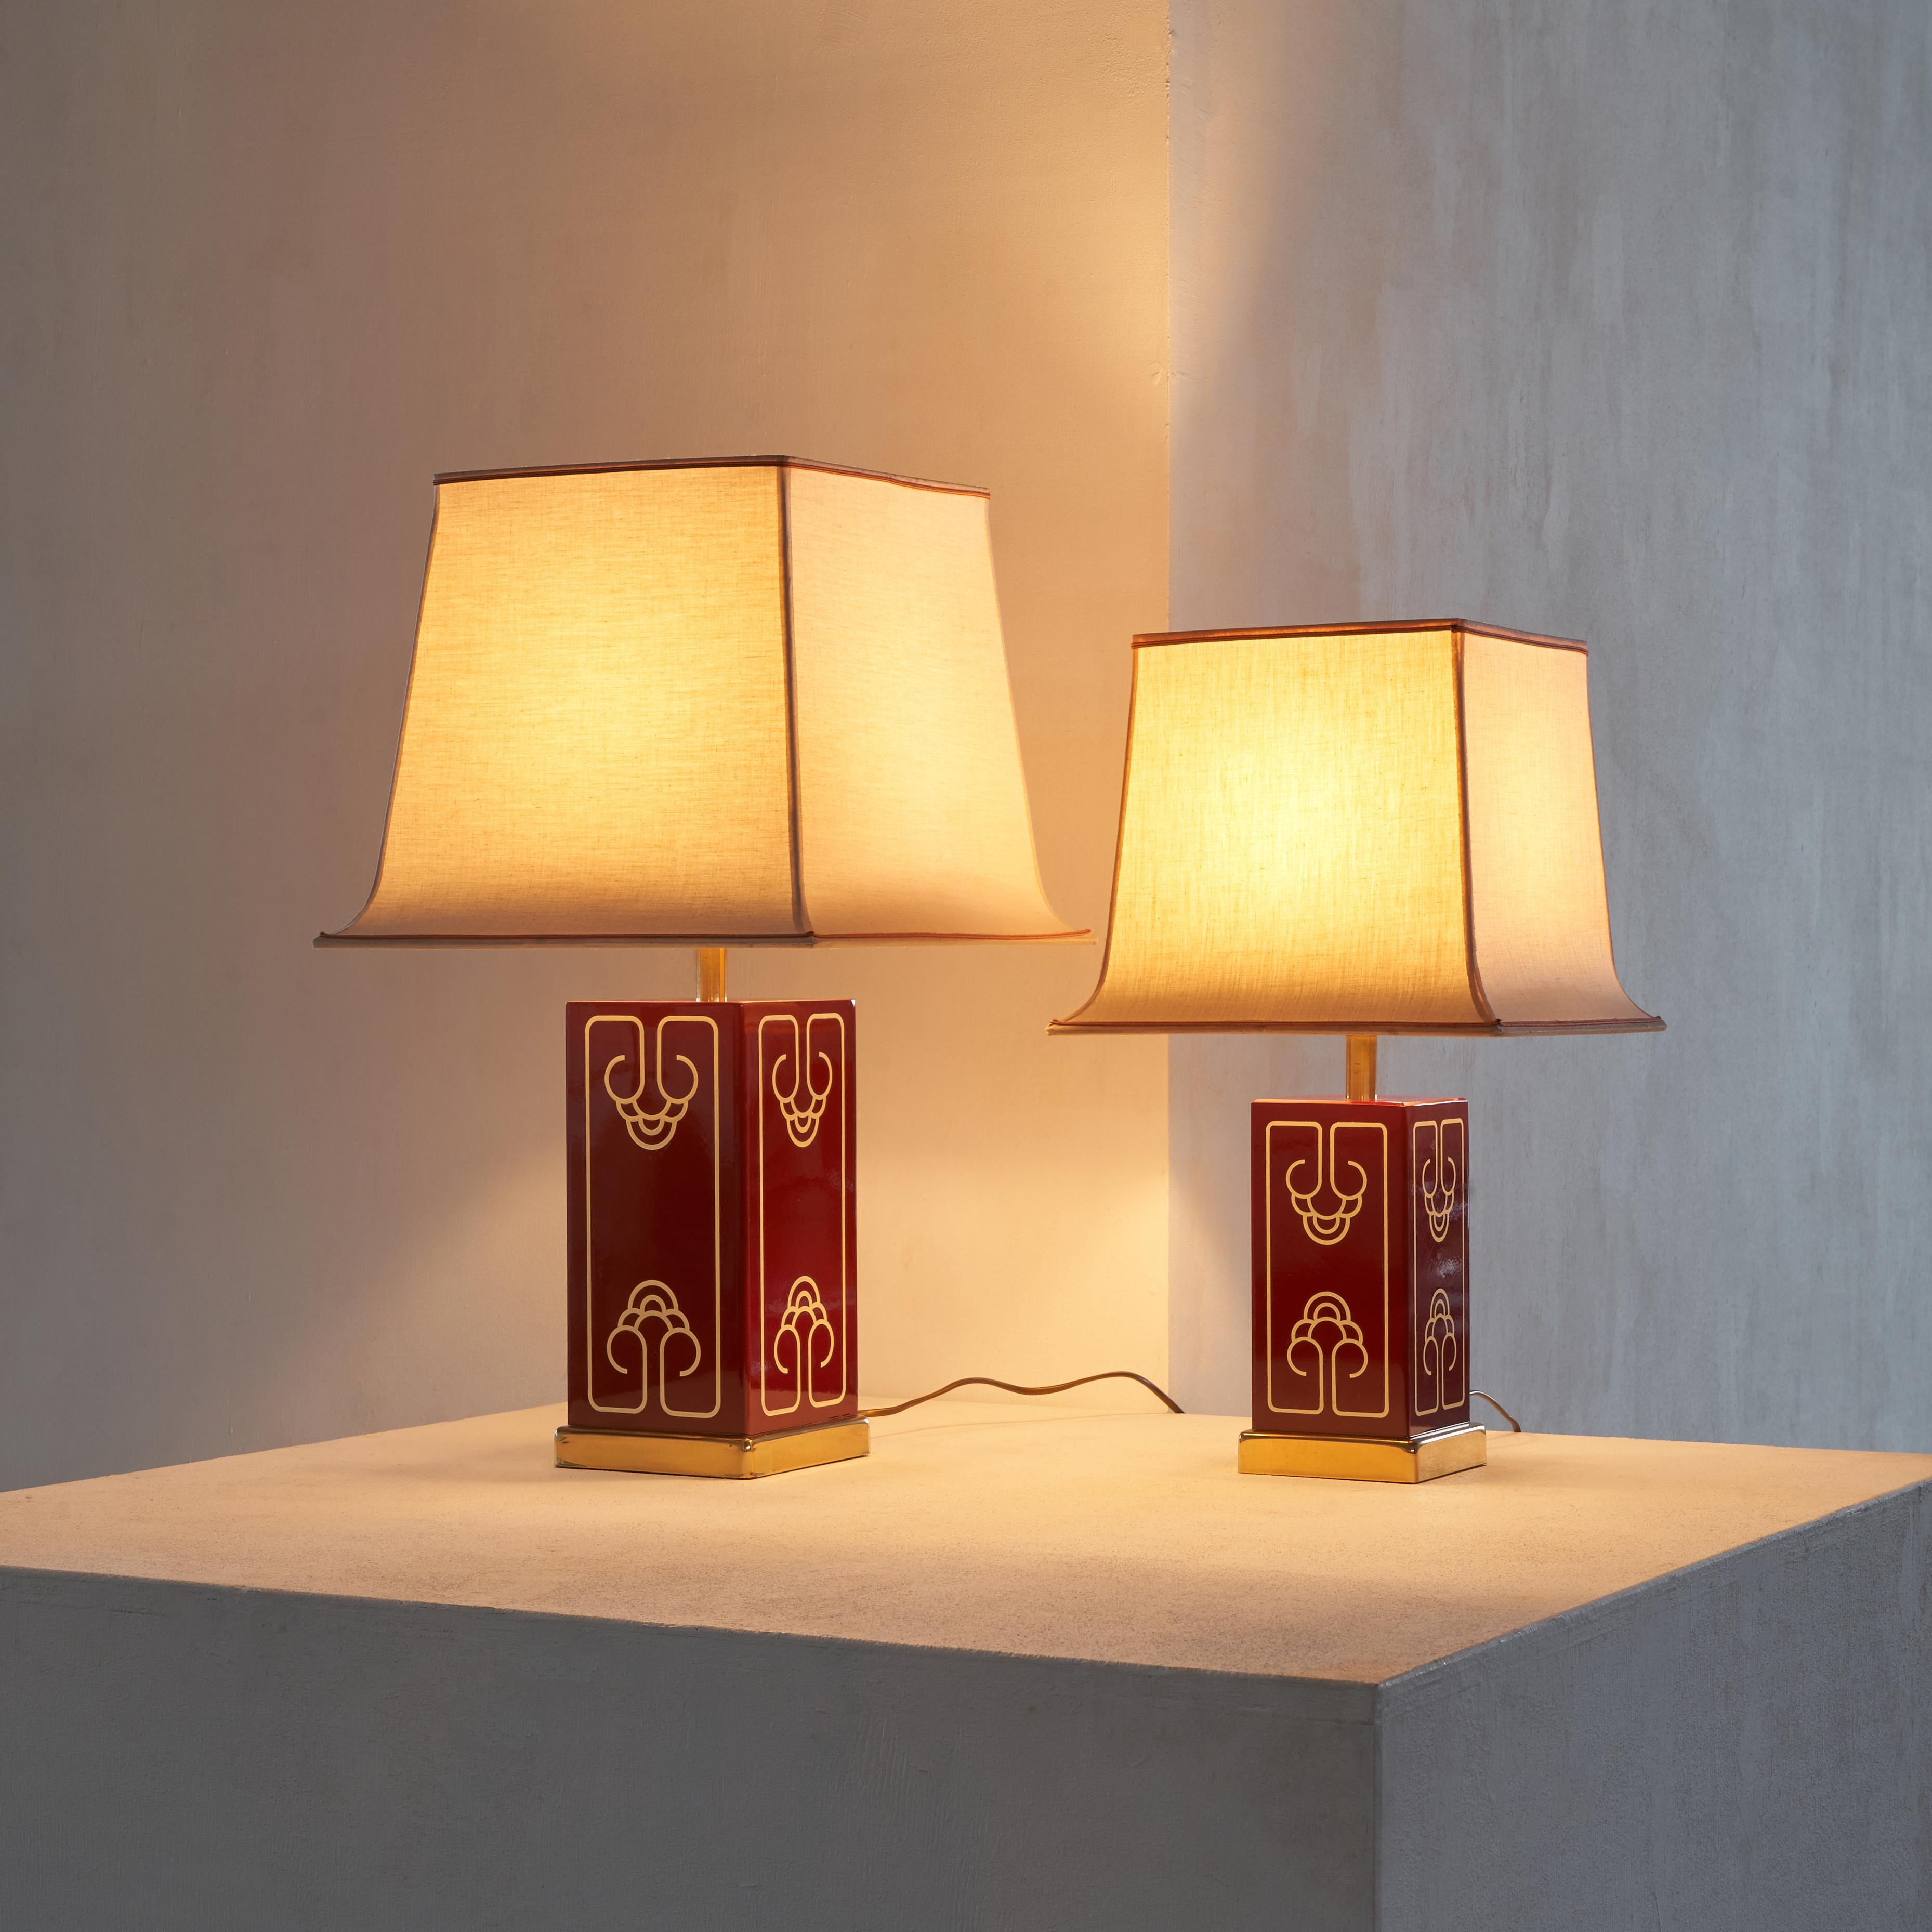 Wonderful pair of French pagoda table lamps in red lacquer and brass. France, 1970s.

These large and impressive table lamps make a great pair. One larger and one a little bit smaller, they can be placed next to each other to make a dynamic duo.